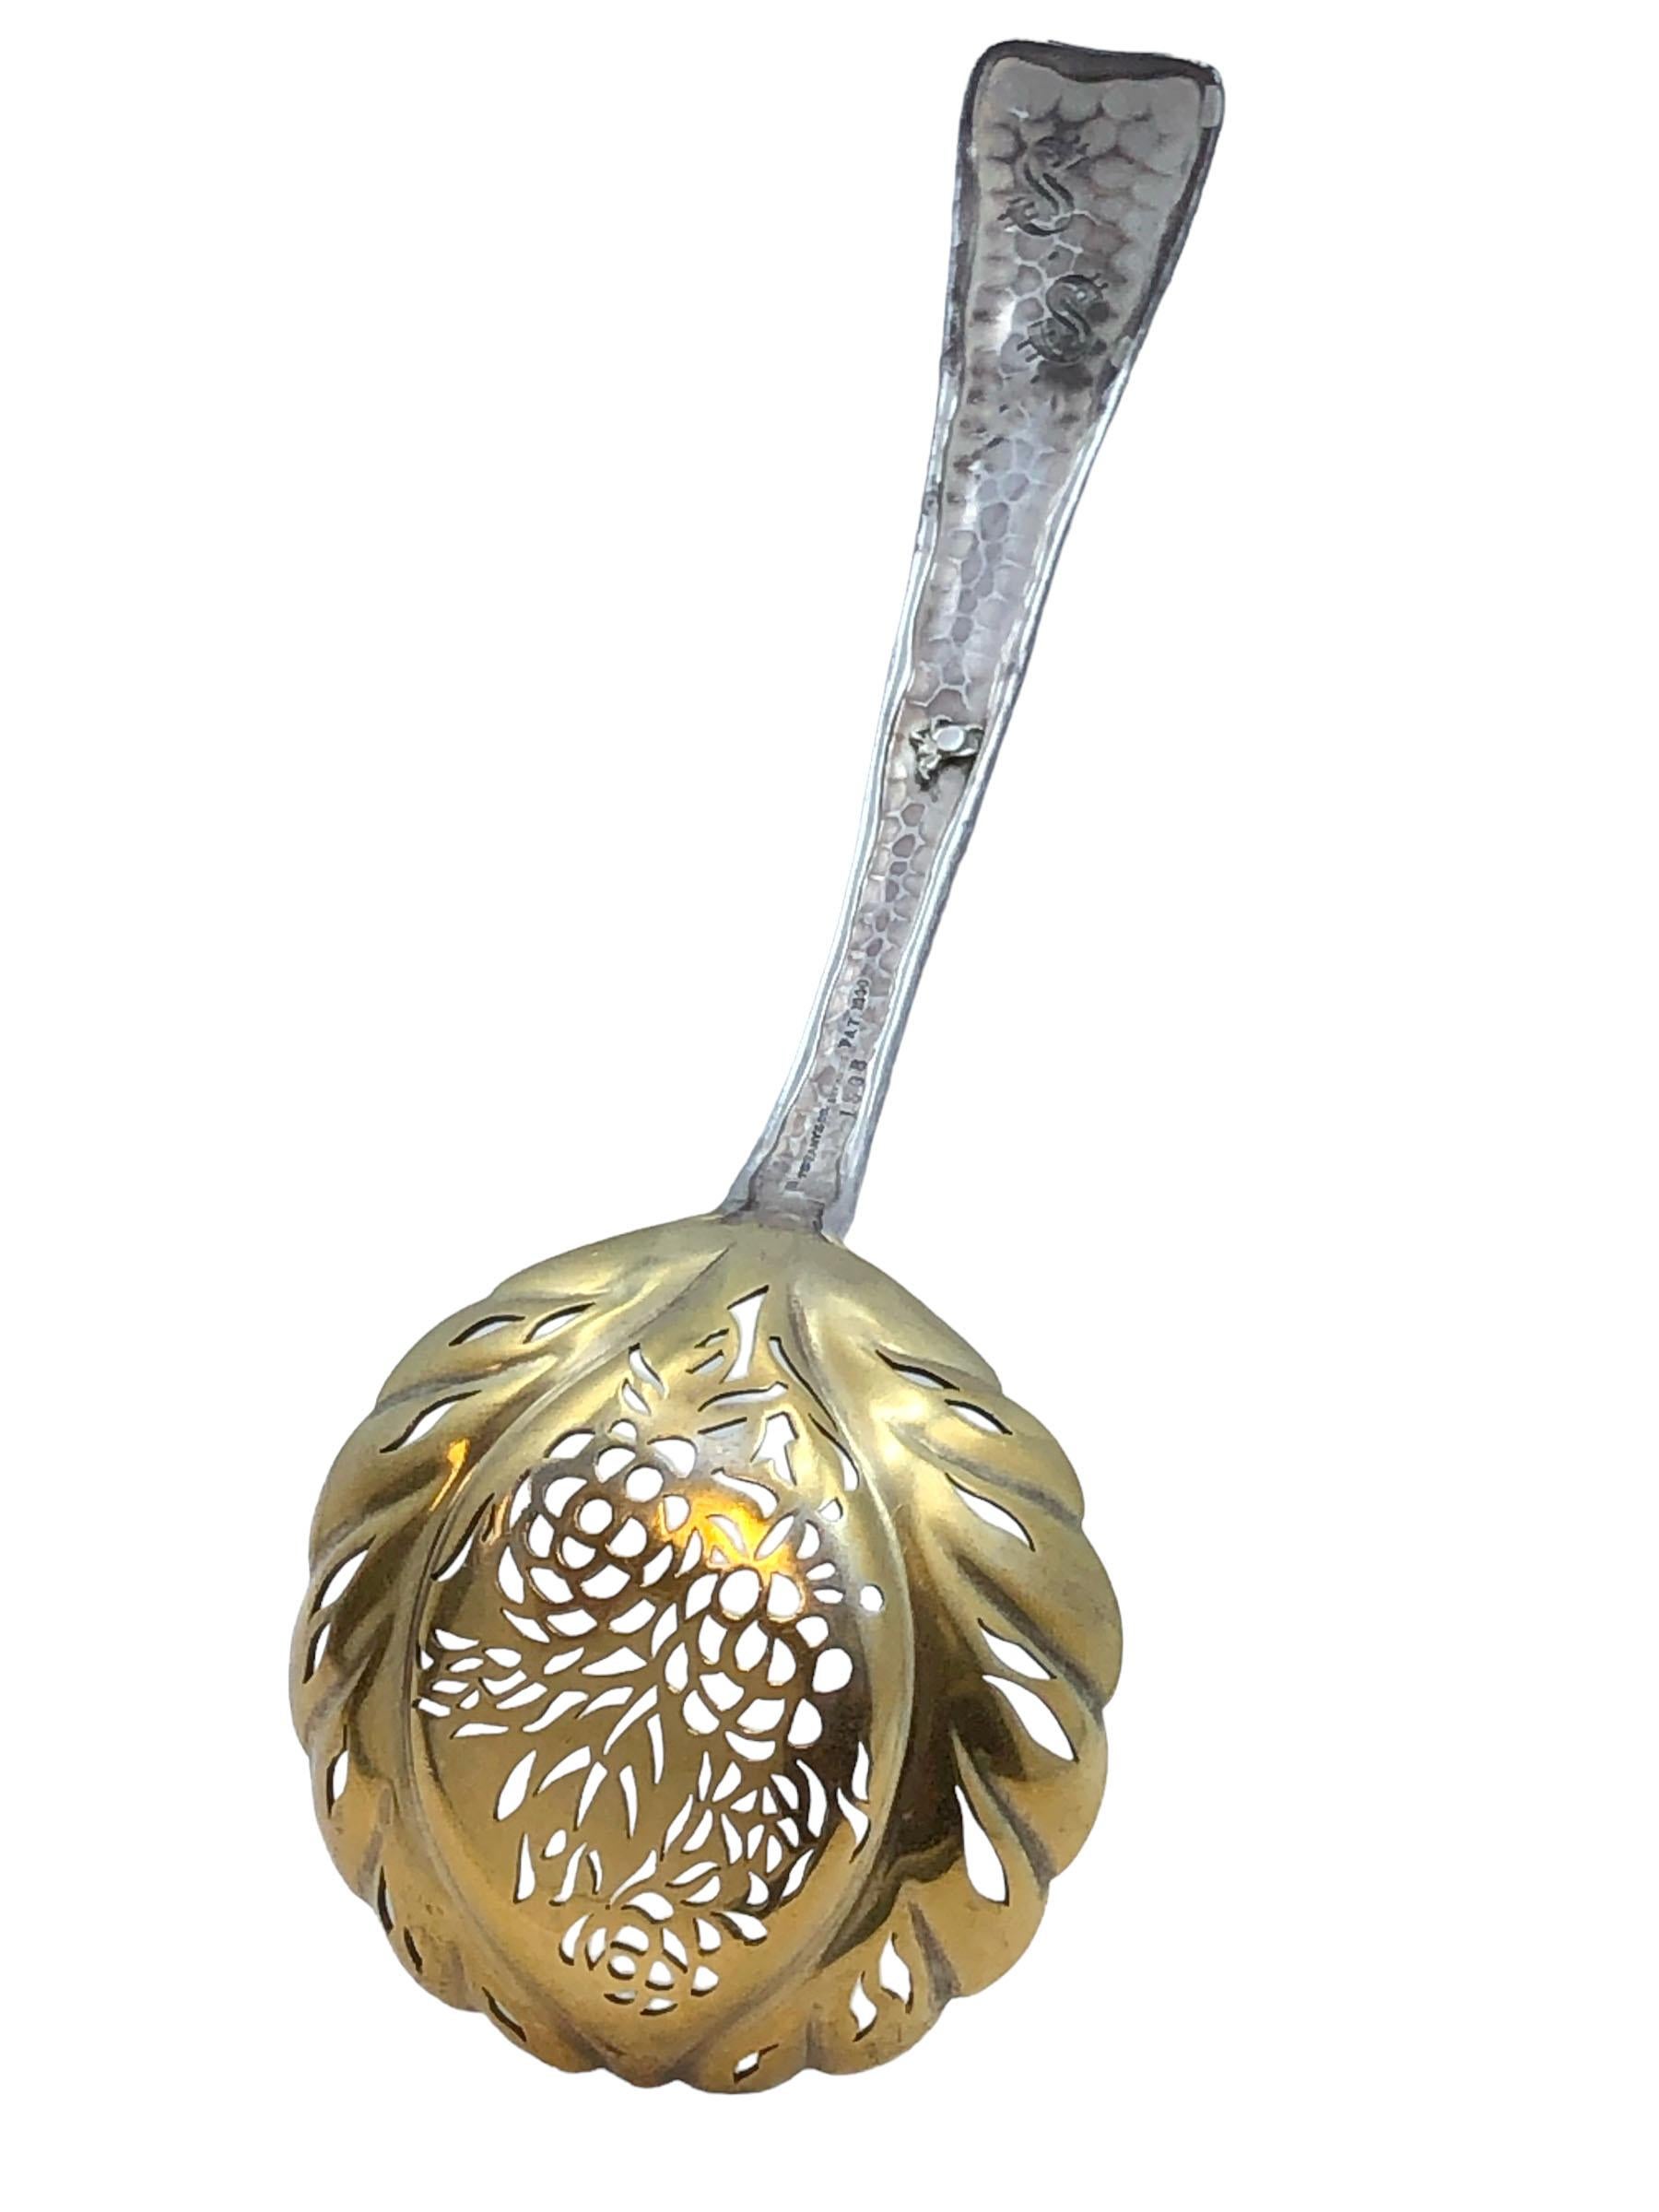 Circa 1910 Tiffany & Company Aesthetic Period Vegetable Server, measuring 6 3/4 inches in length, a hand hammered Handle with an applied Lizard on the front and an applied spider on the back, further decorated with Gold wash designs. The gold wash